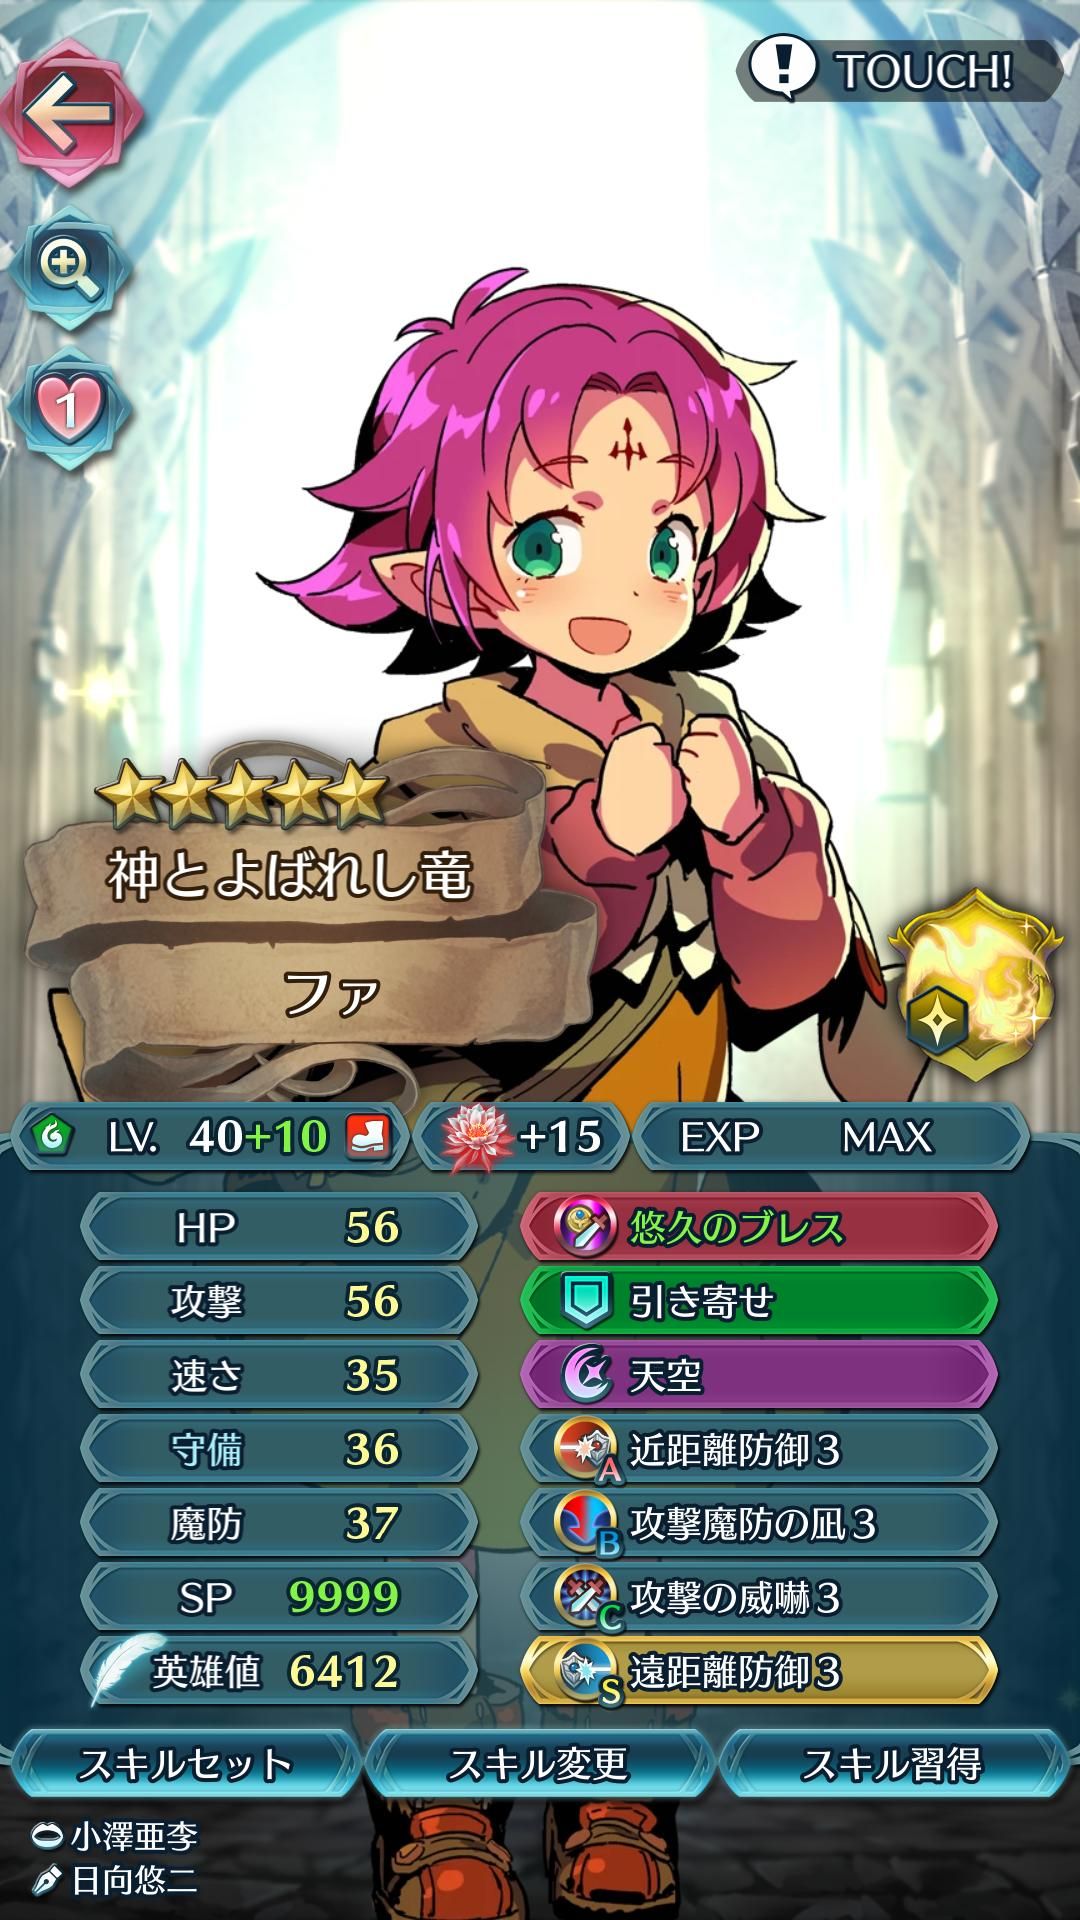 【Rouho】Fire Emblem Heroes implements a doskebe character 4